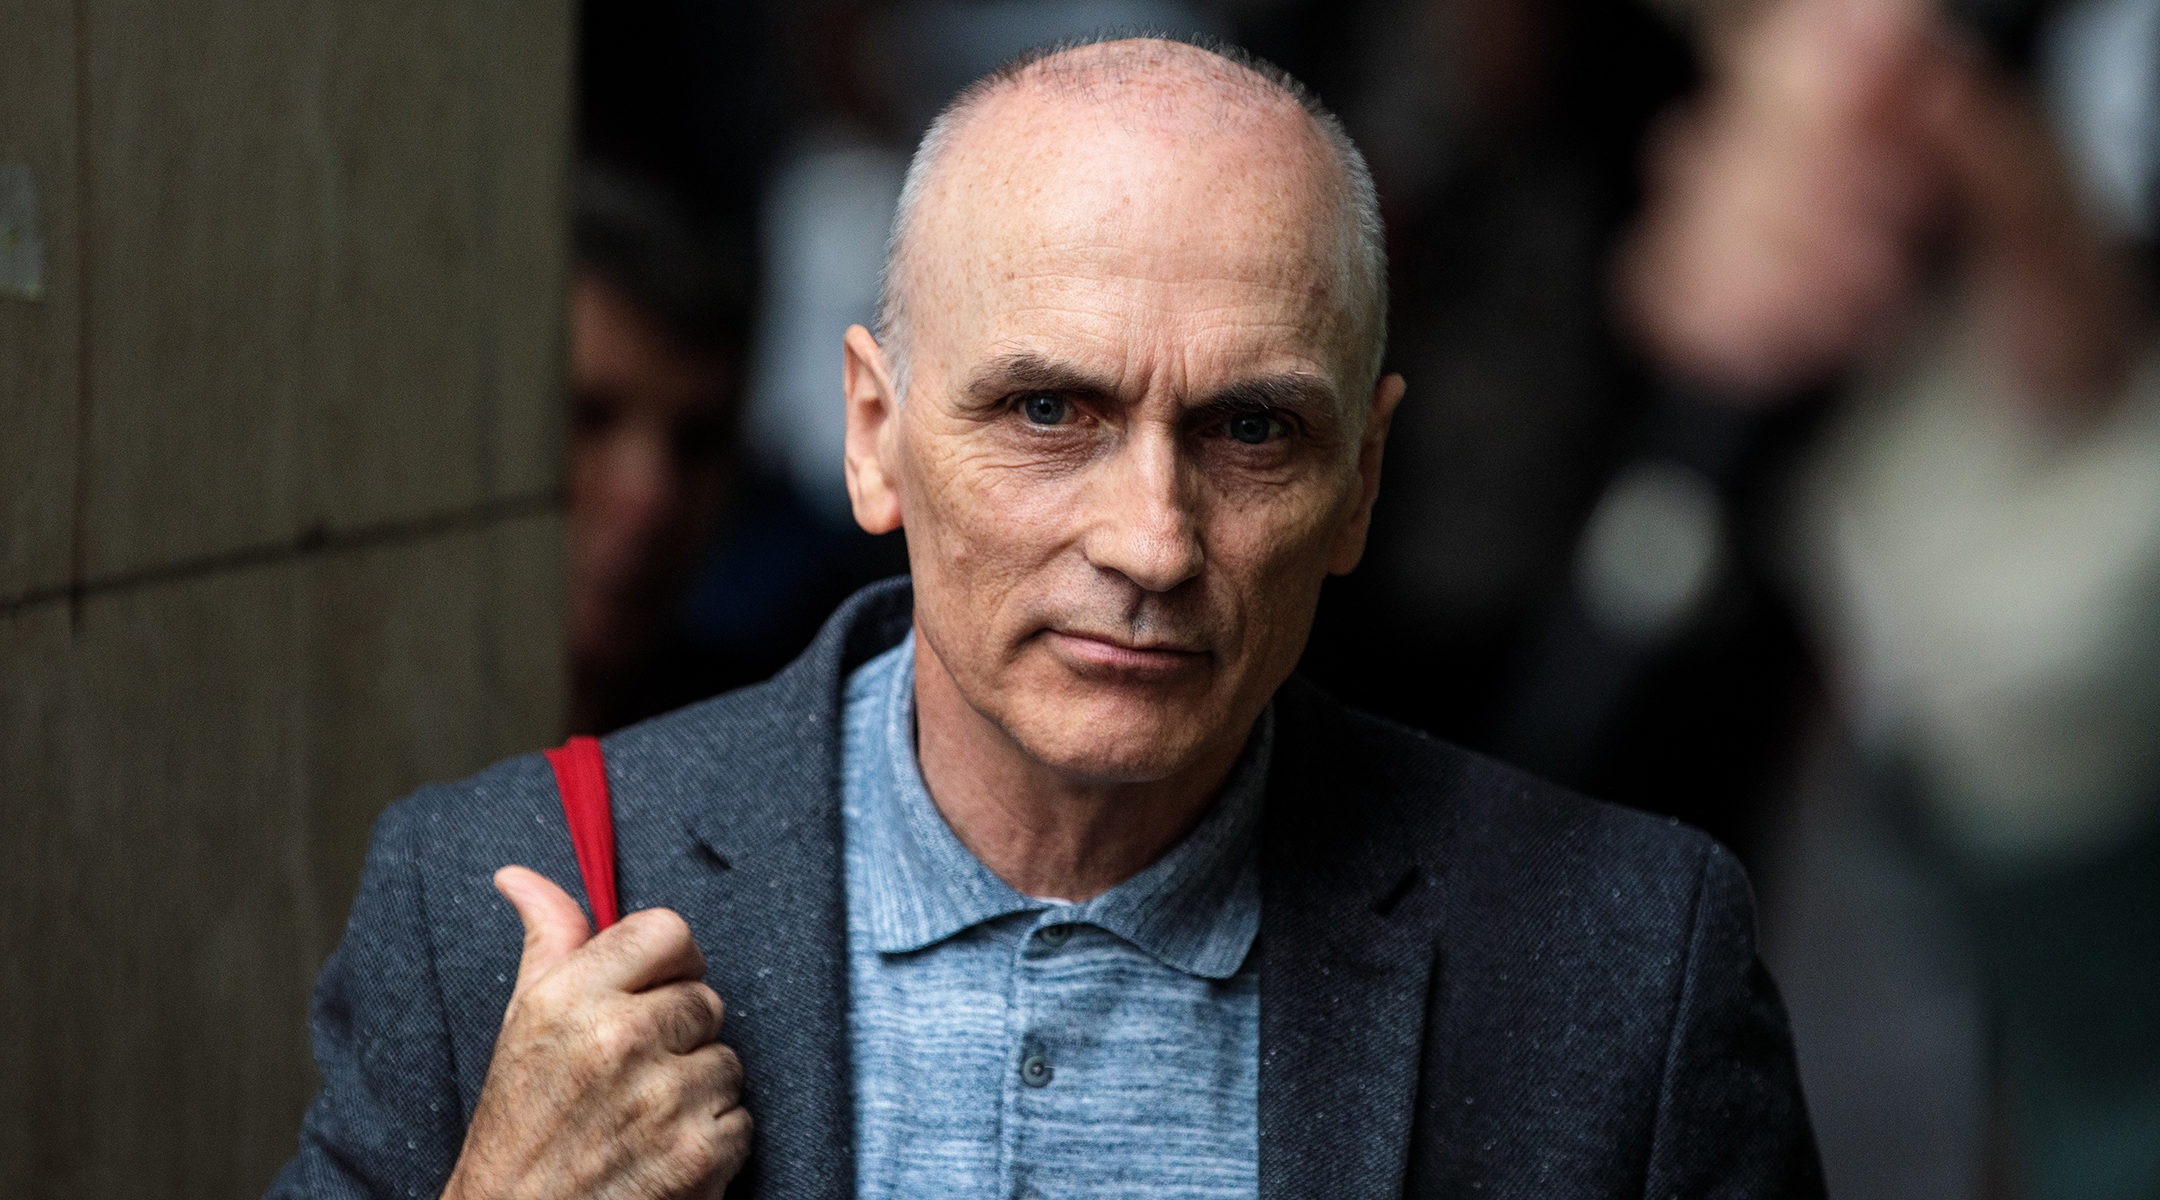 Labour MP Chris Williamson on September 4, 2018 in London. (Photo by Jack Taylor/Getty Images)